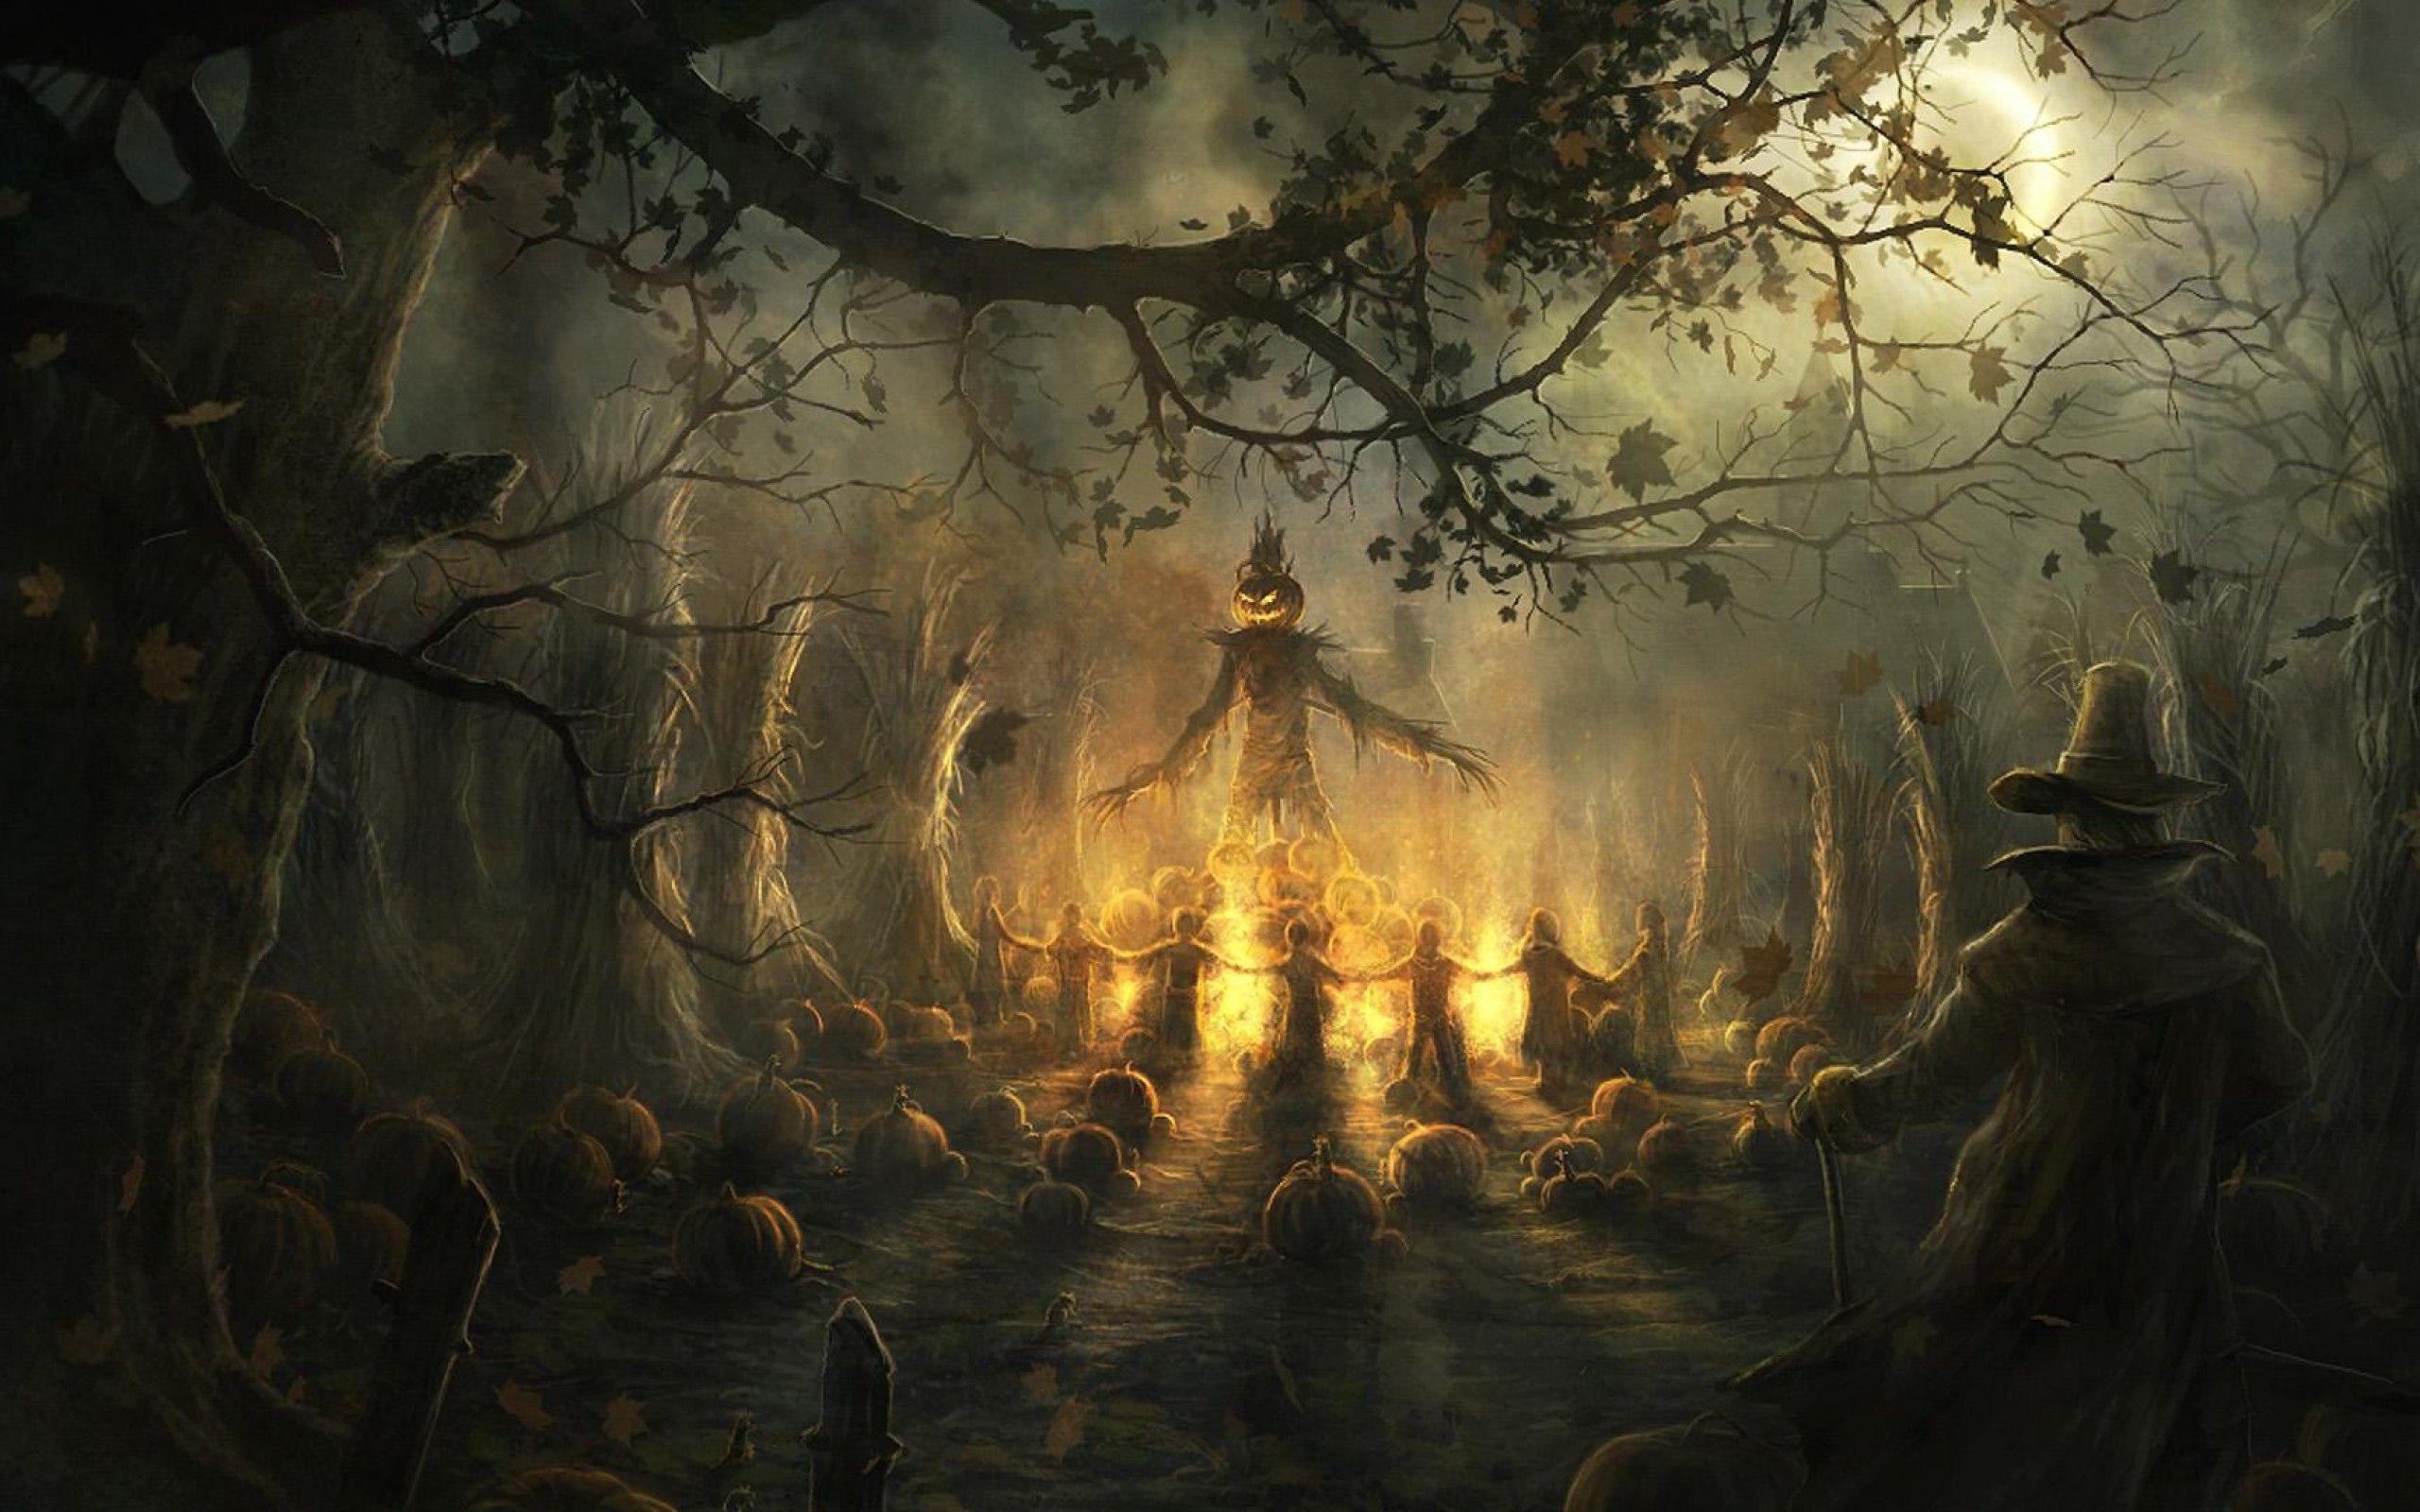 Halloween Background & Wallpaper Collection 2014